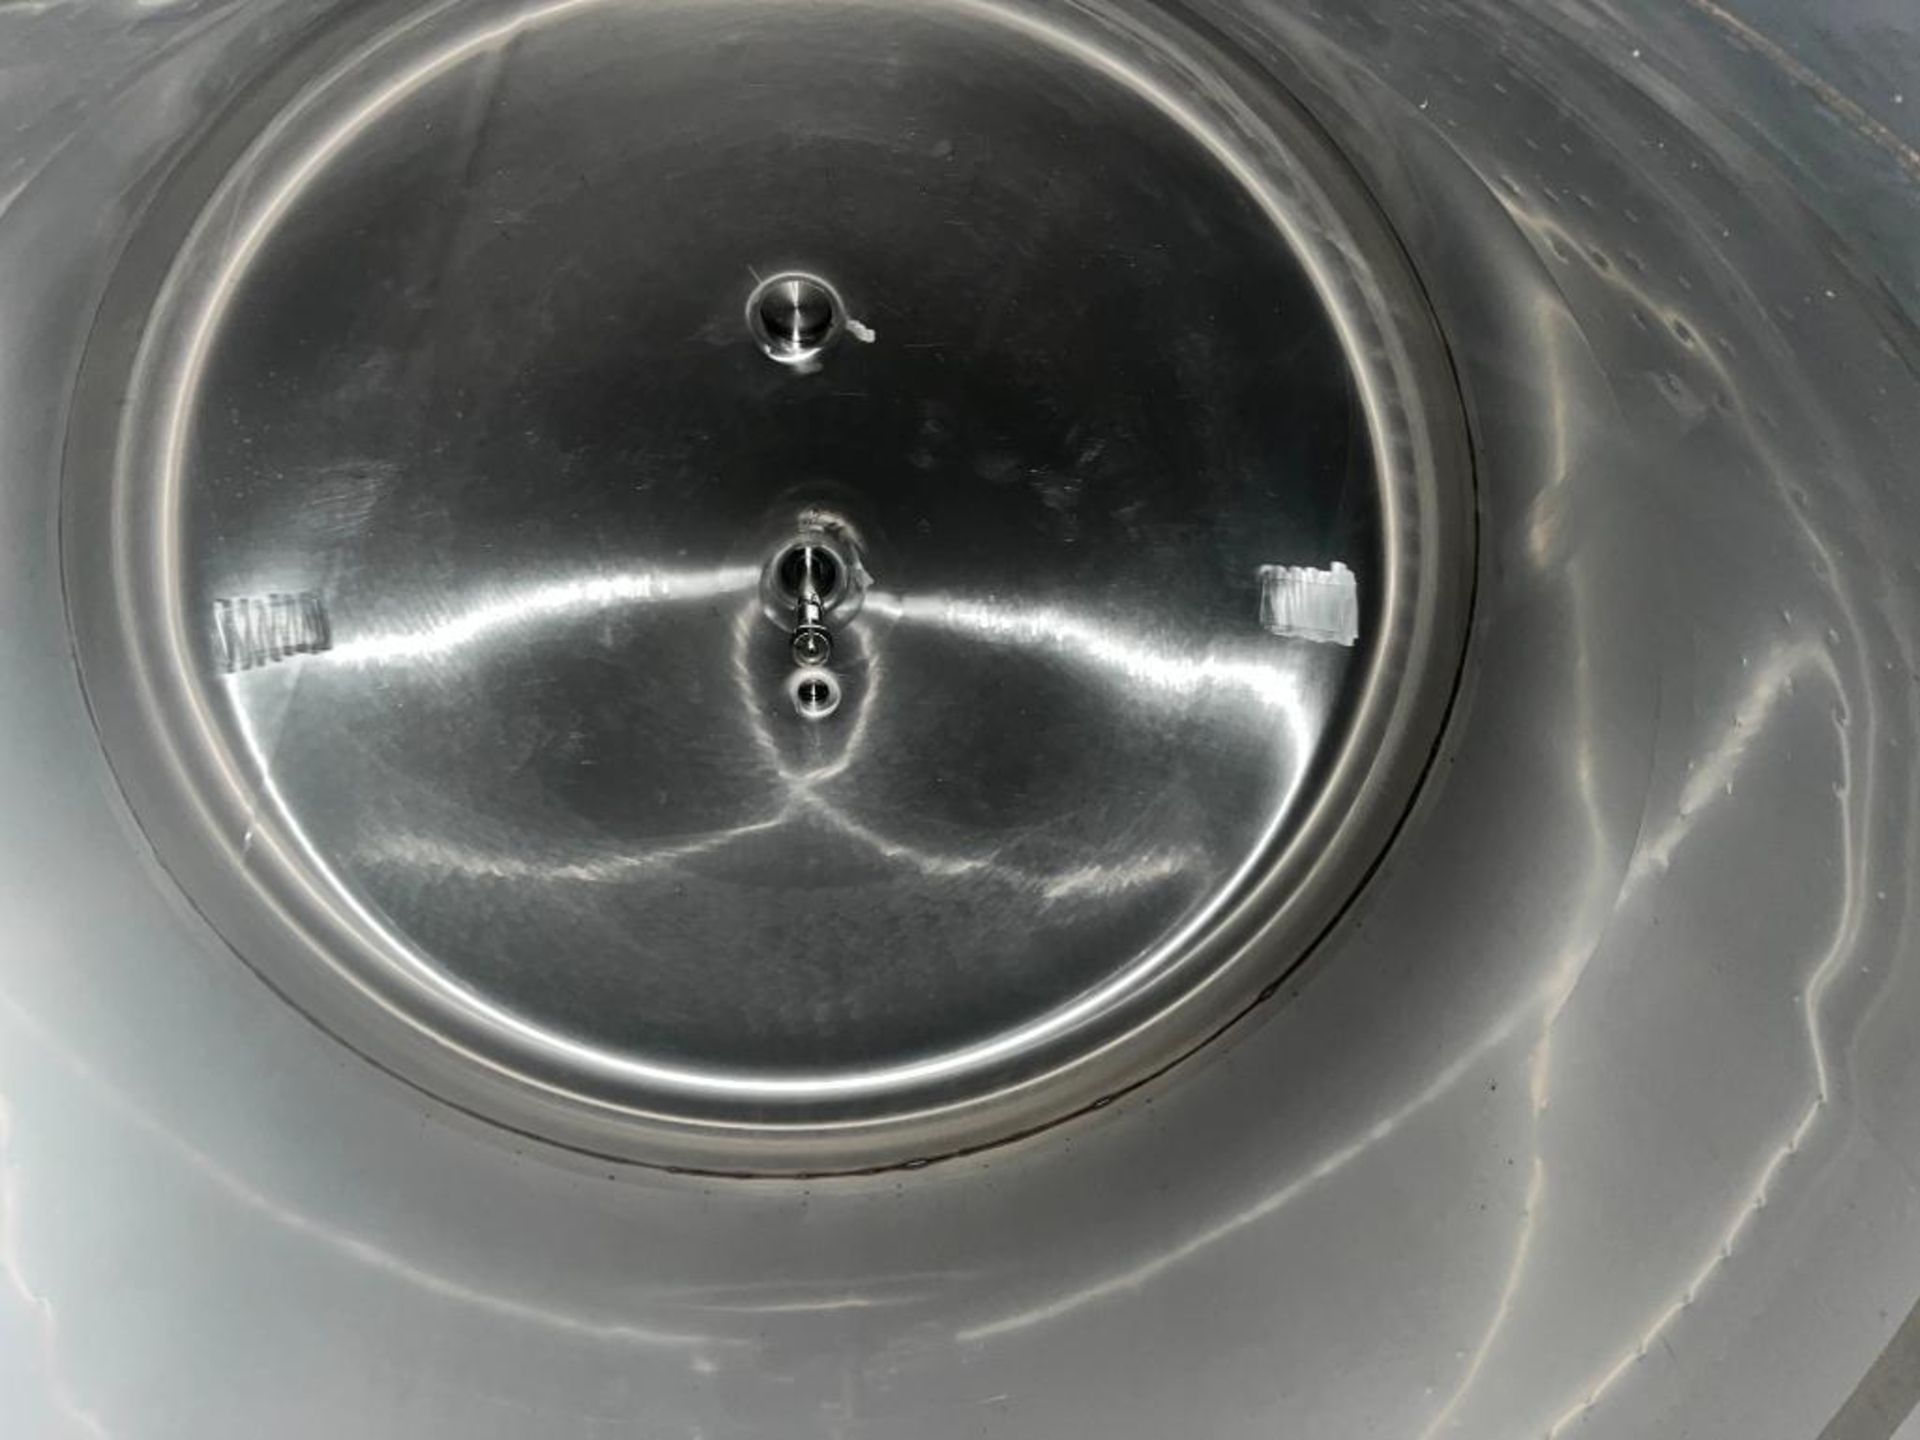 Shenzhen Jacketed Fermenter Tank, 60BBL (1800 Gallon), 304 Stainless Steel. Dished top coned bottom. - Image 12 of 12